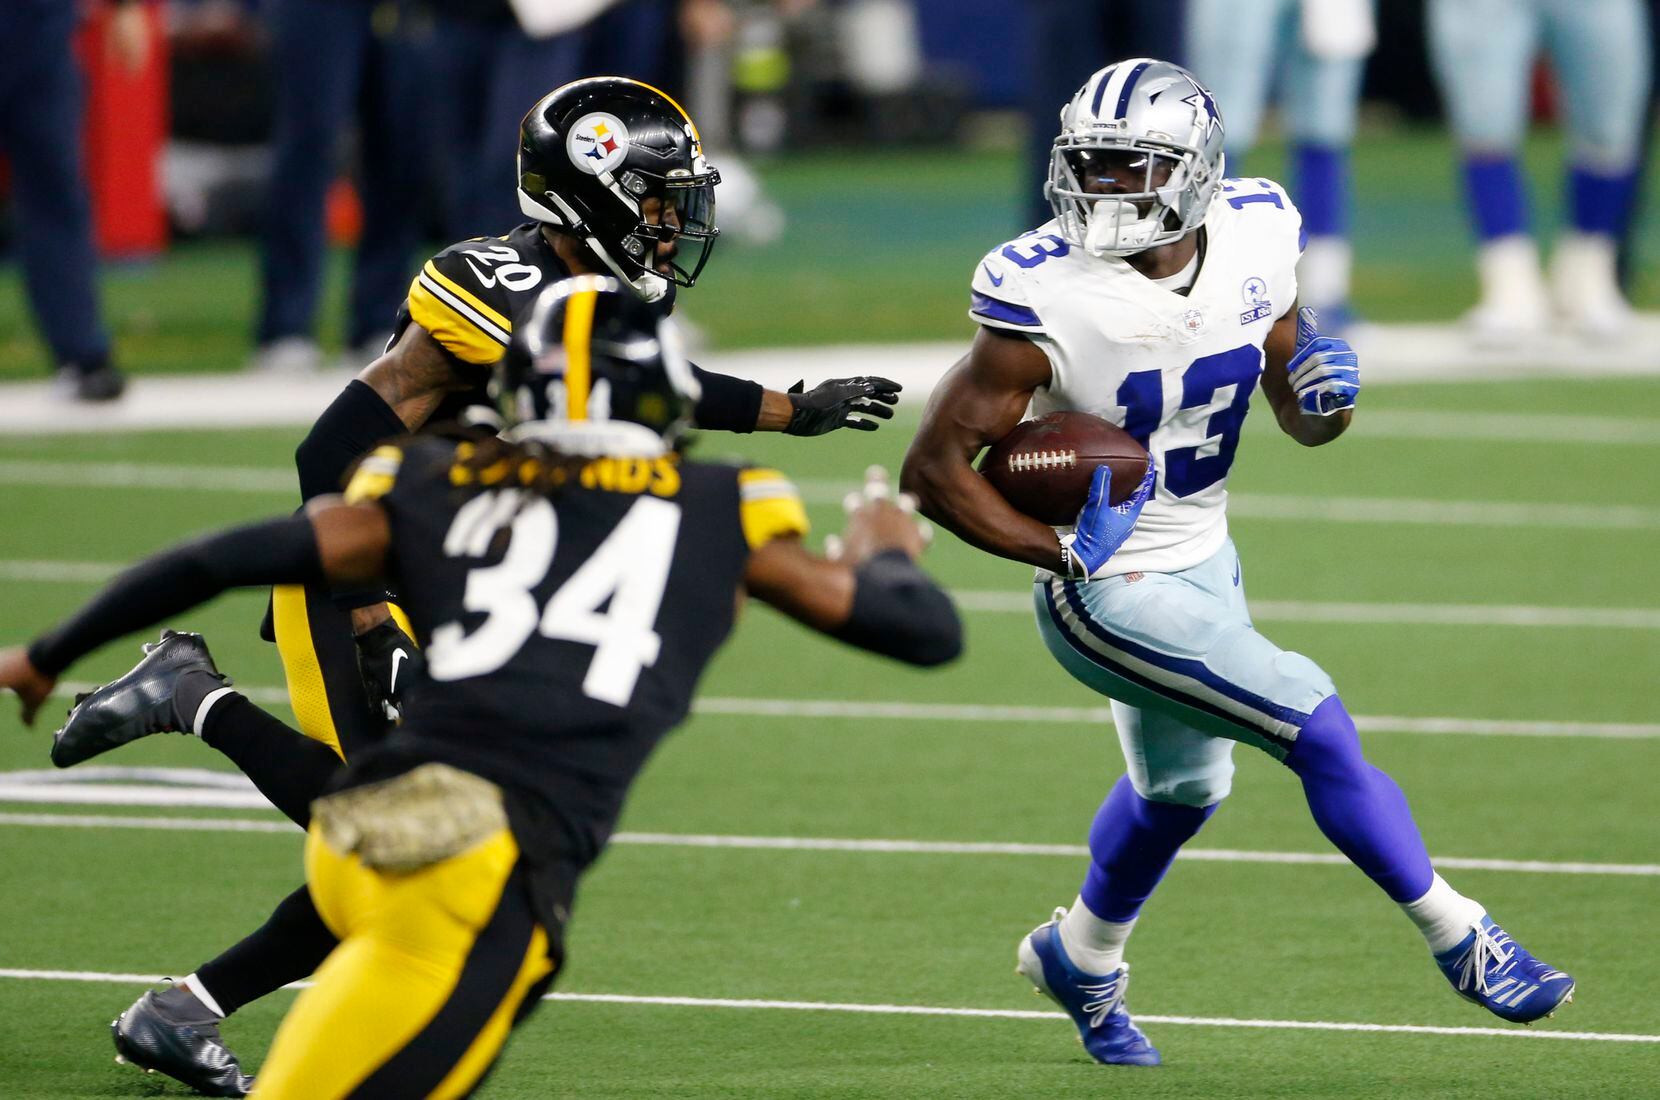 Dallas Cowboys wide receiver Michael Gallup (13) attempts to break away from Pittsburgh Steelers cornerback Cameron Sutton (20) after the catch during the fourth quarter of play at AT&T Stadium in Arlington, Texas on Sunday, November 8, 2020. Dallas Cowboys lost to the Pittsburgh Steelers 24-19. (Vernon Bryant/The Dallas Morning News)